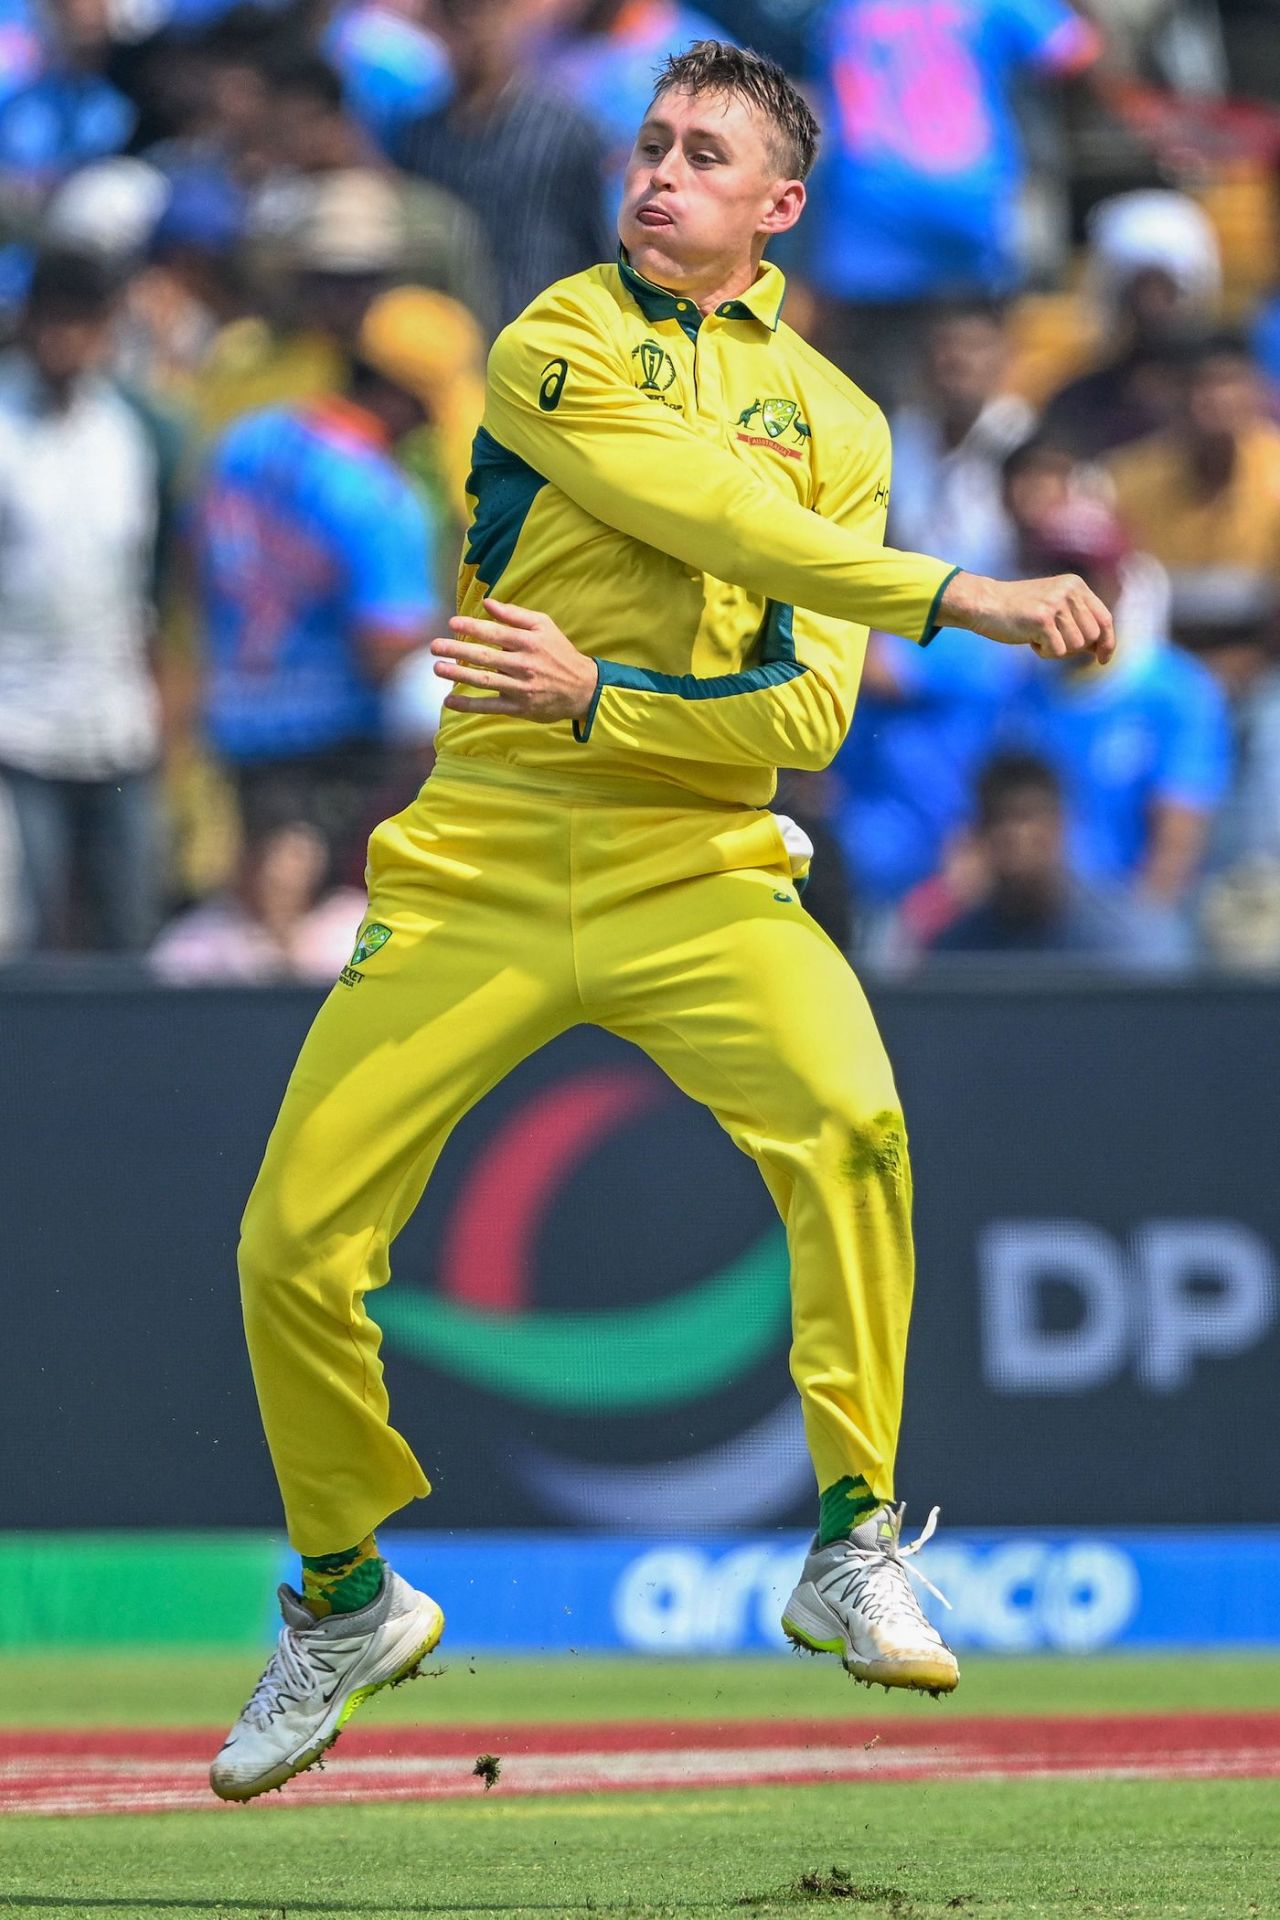 A fantastic bit of fielding and a well-aimed throw from Marnus Labuschagne accounted for Najmul Hossain Shanto, Australia vs Bangladesh, World Cup, Pune, November 11, 2023